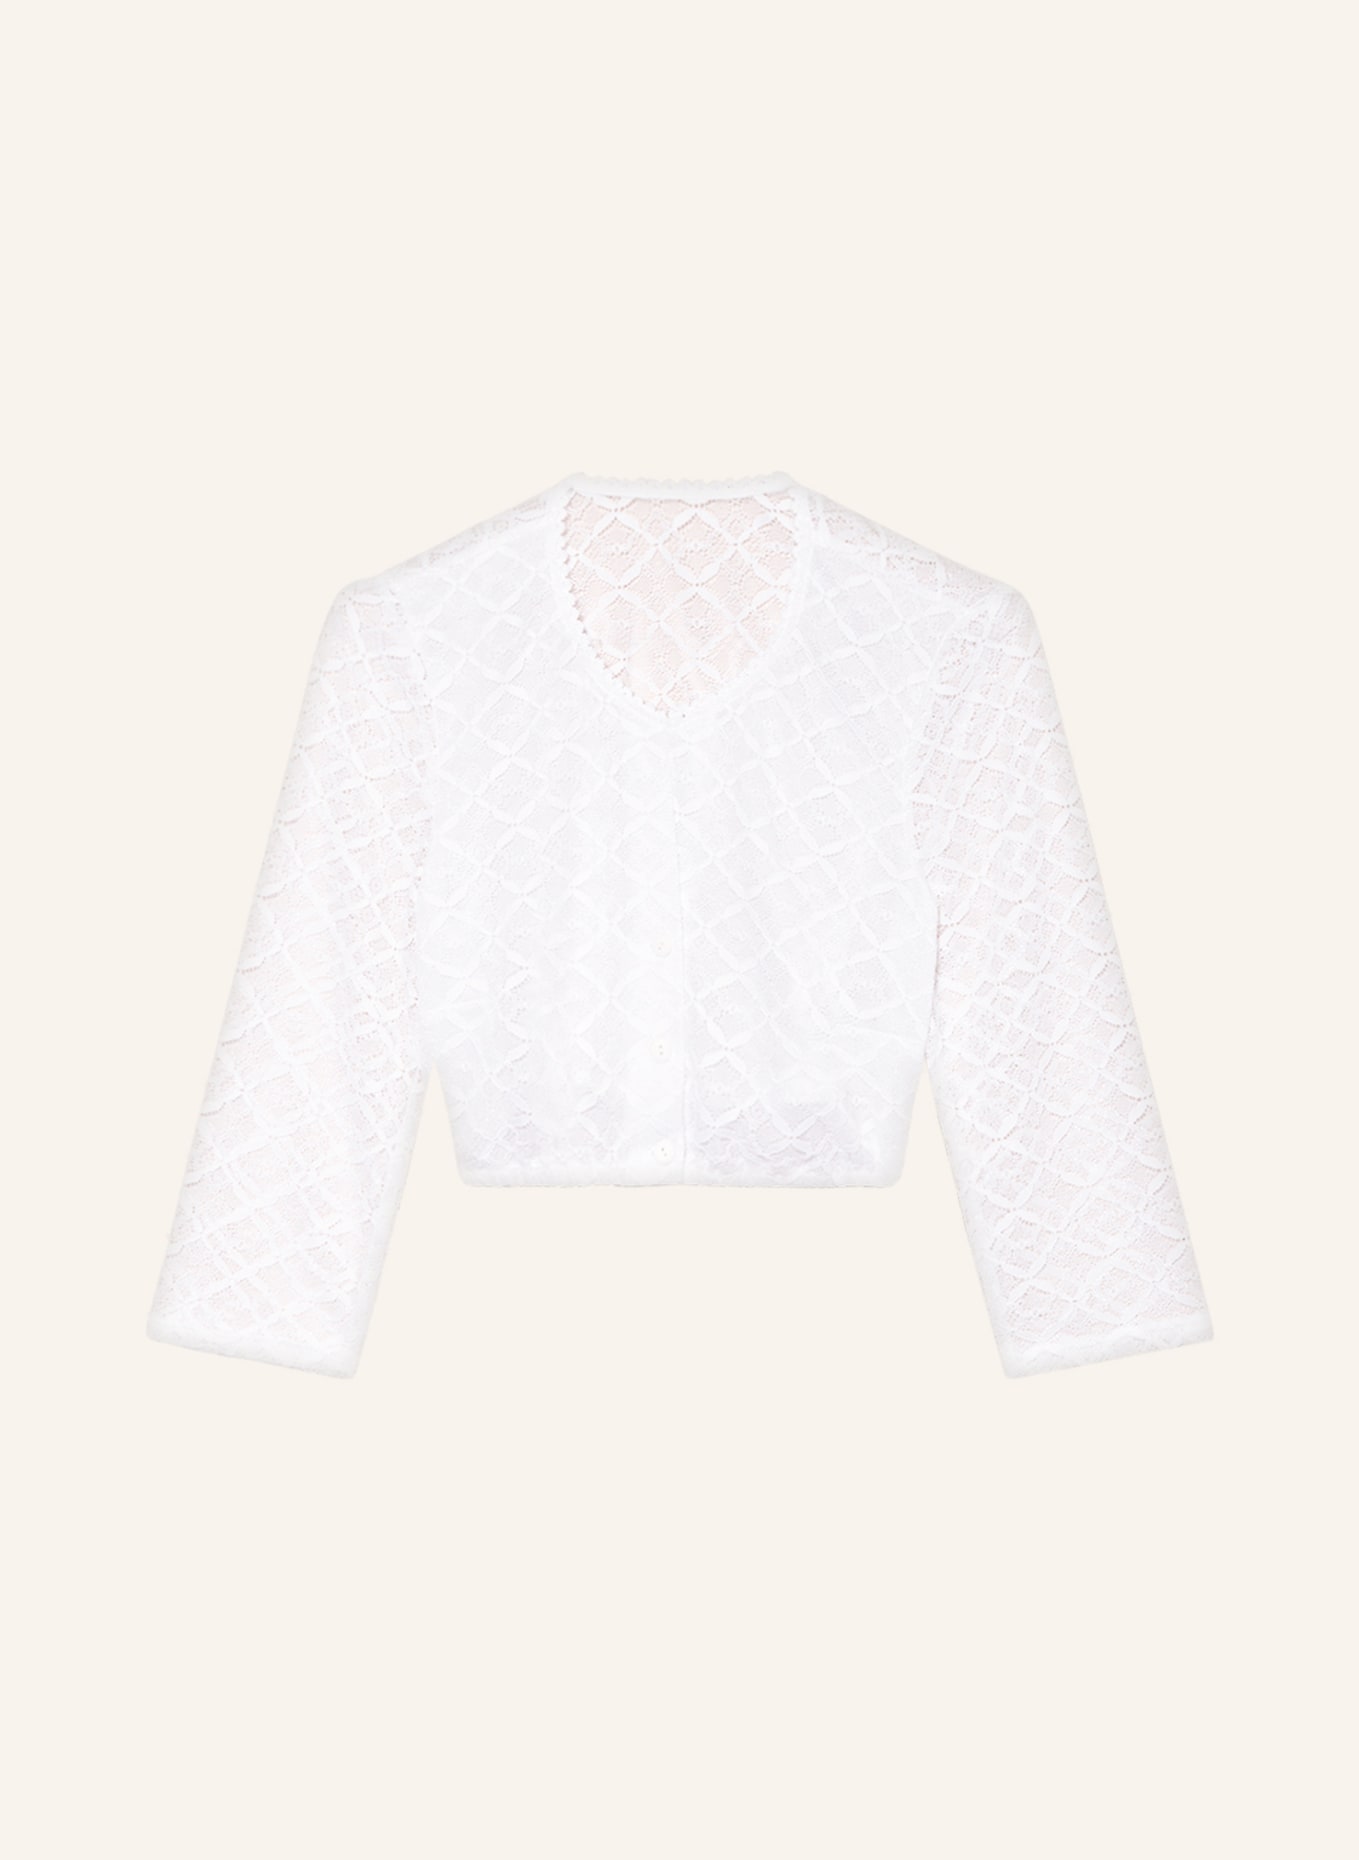 WALDORFF Dirndl blouse in lace with 3/4 sleeves, Color: WHITE (Image 1)